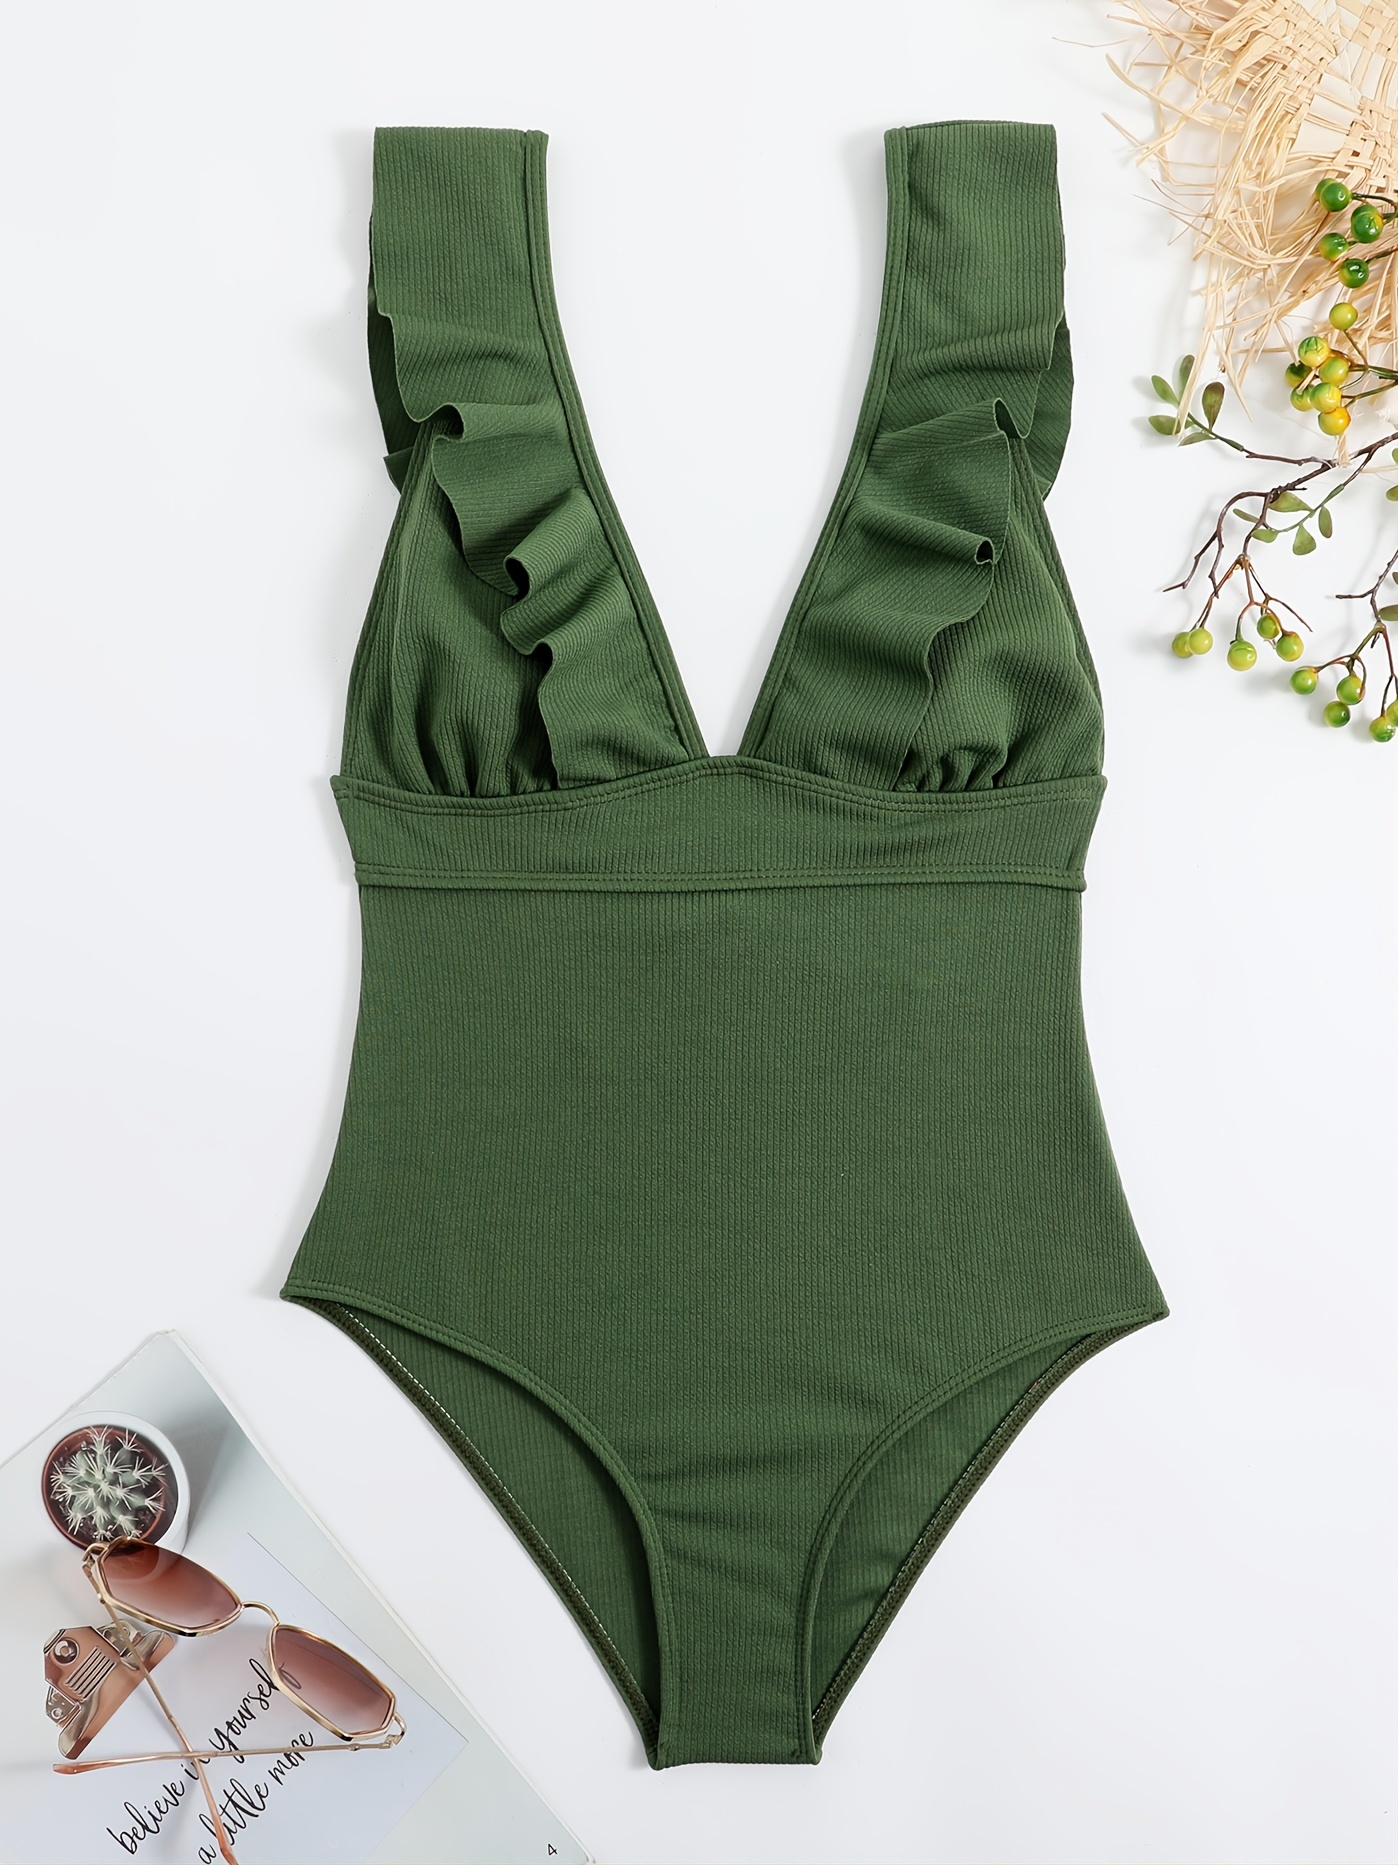 Textured Fabric Ruffle Twist One-piece Swimsuit, Plain Green Stretchy V  Neck Bathing Suits, Women's Swimwear & Clothing